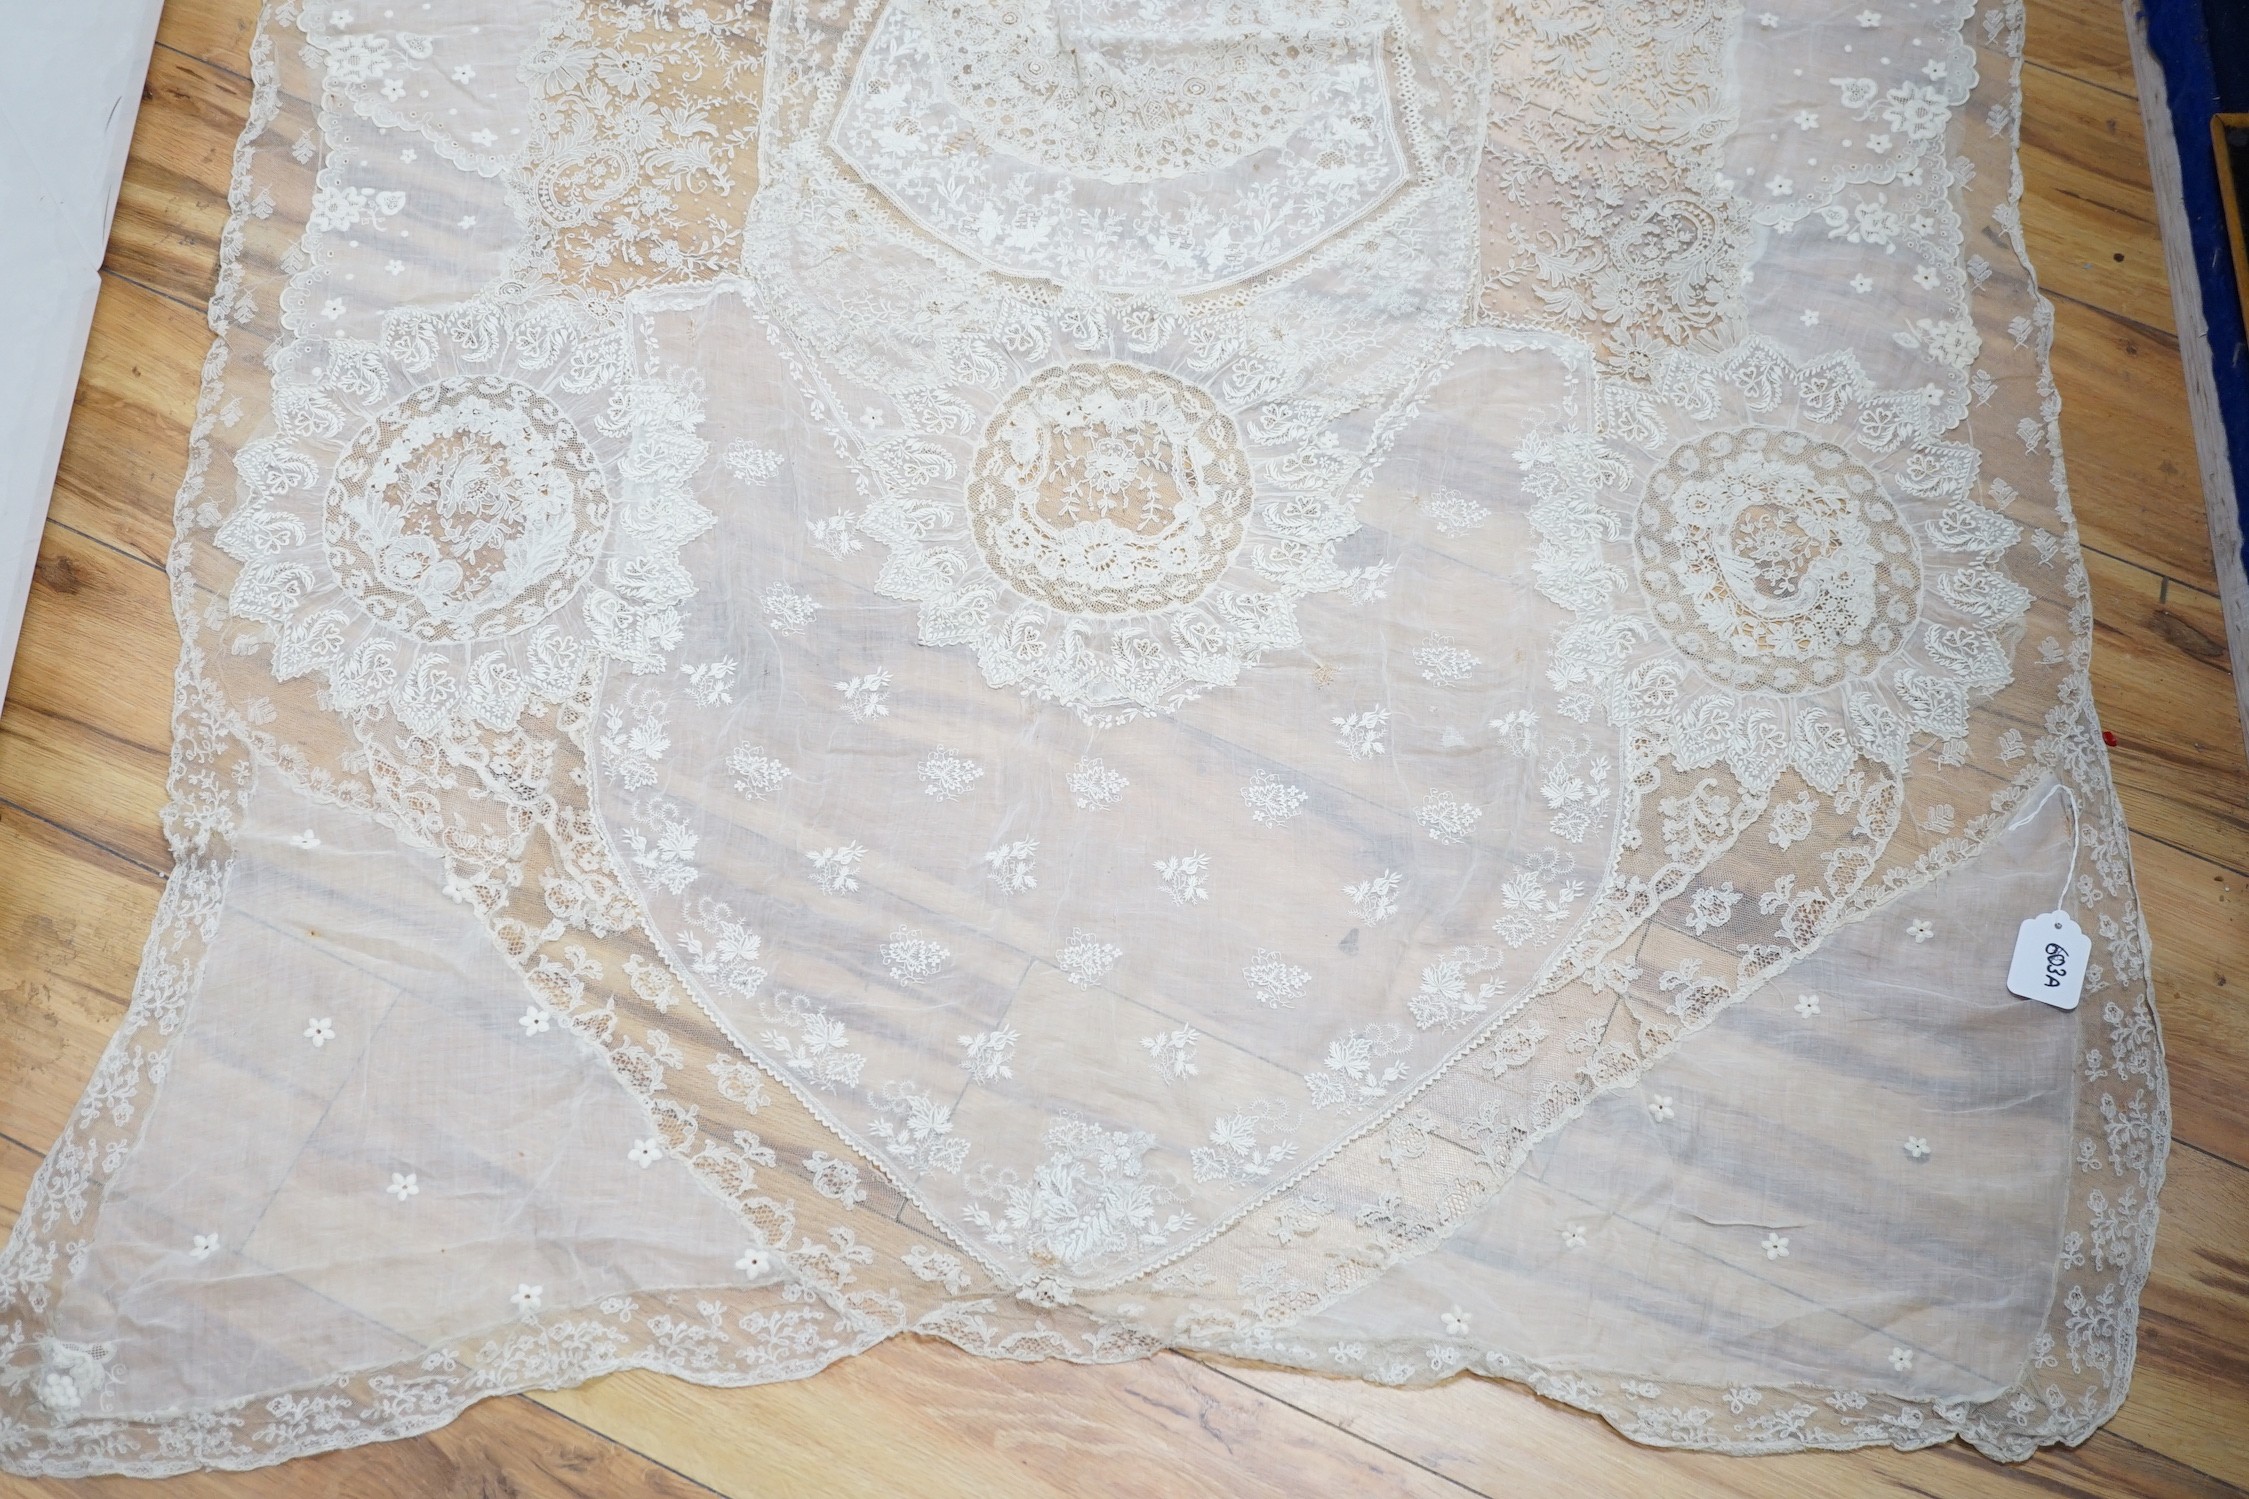 A late 19th century Normandy lace table cover of hand spun linen, hand white worked, with Brussels Point de Gaze insertions and bobbin lace edging, together with two feathers and a net veil